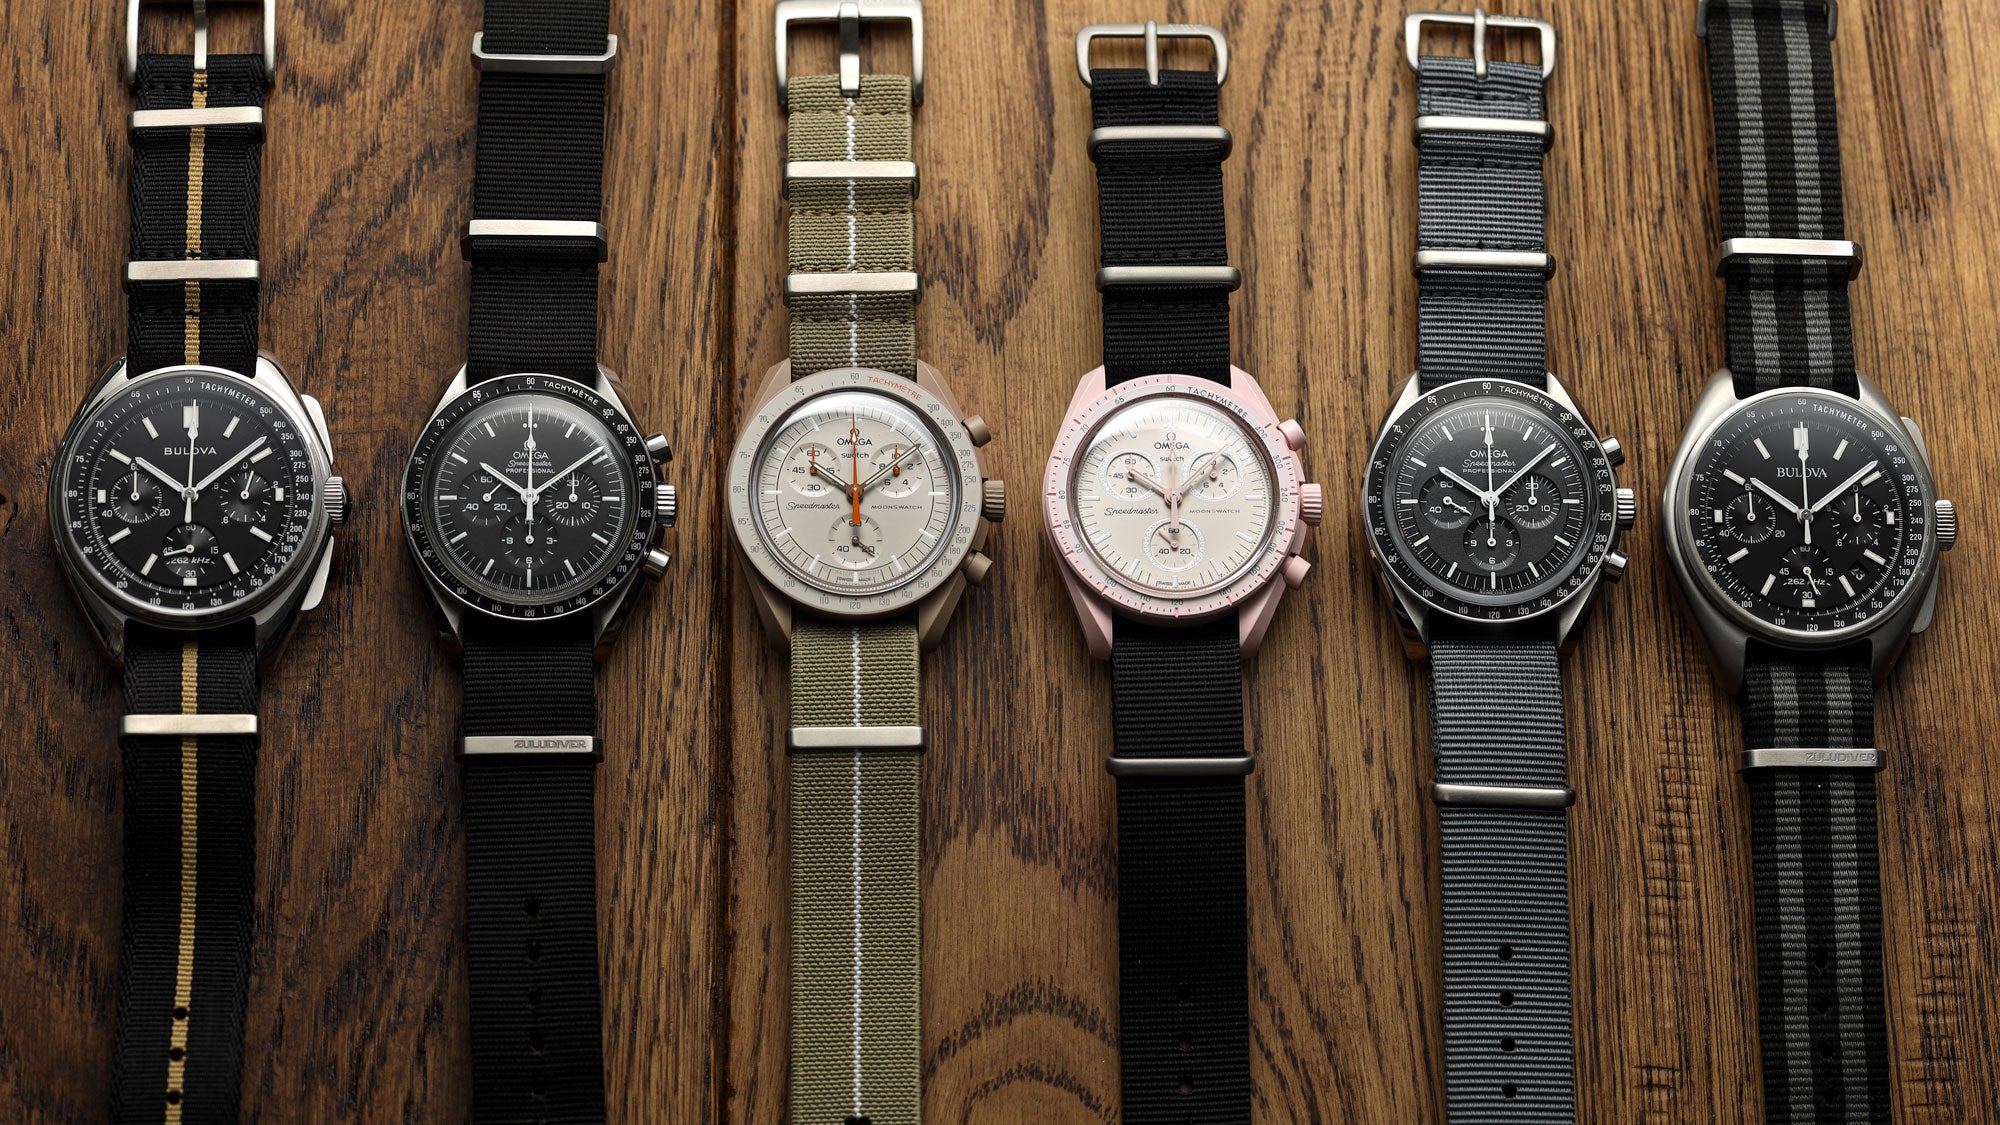 The Ultimate Guide To Buying A Moonwatch Plus Our Top Strap Recommendations